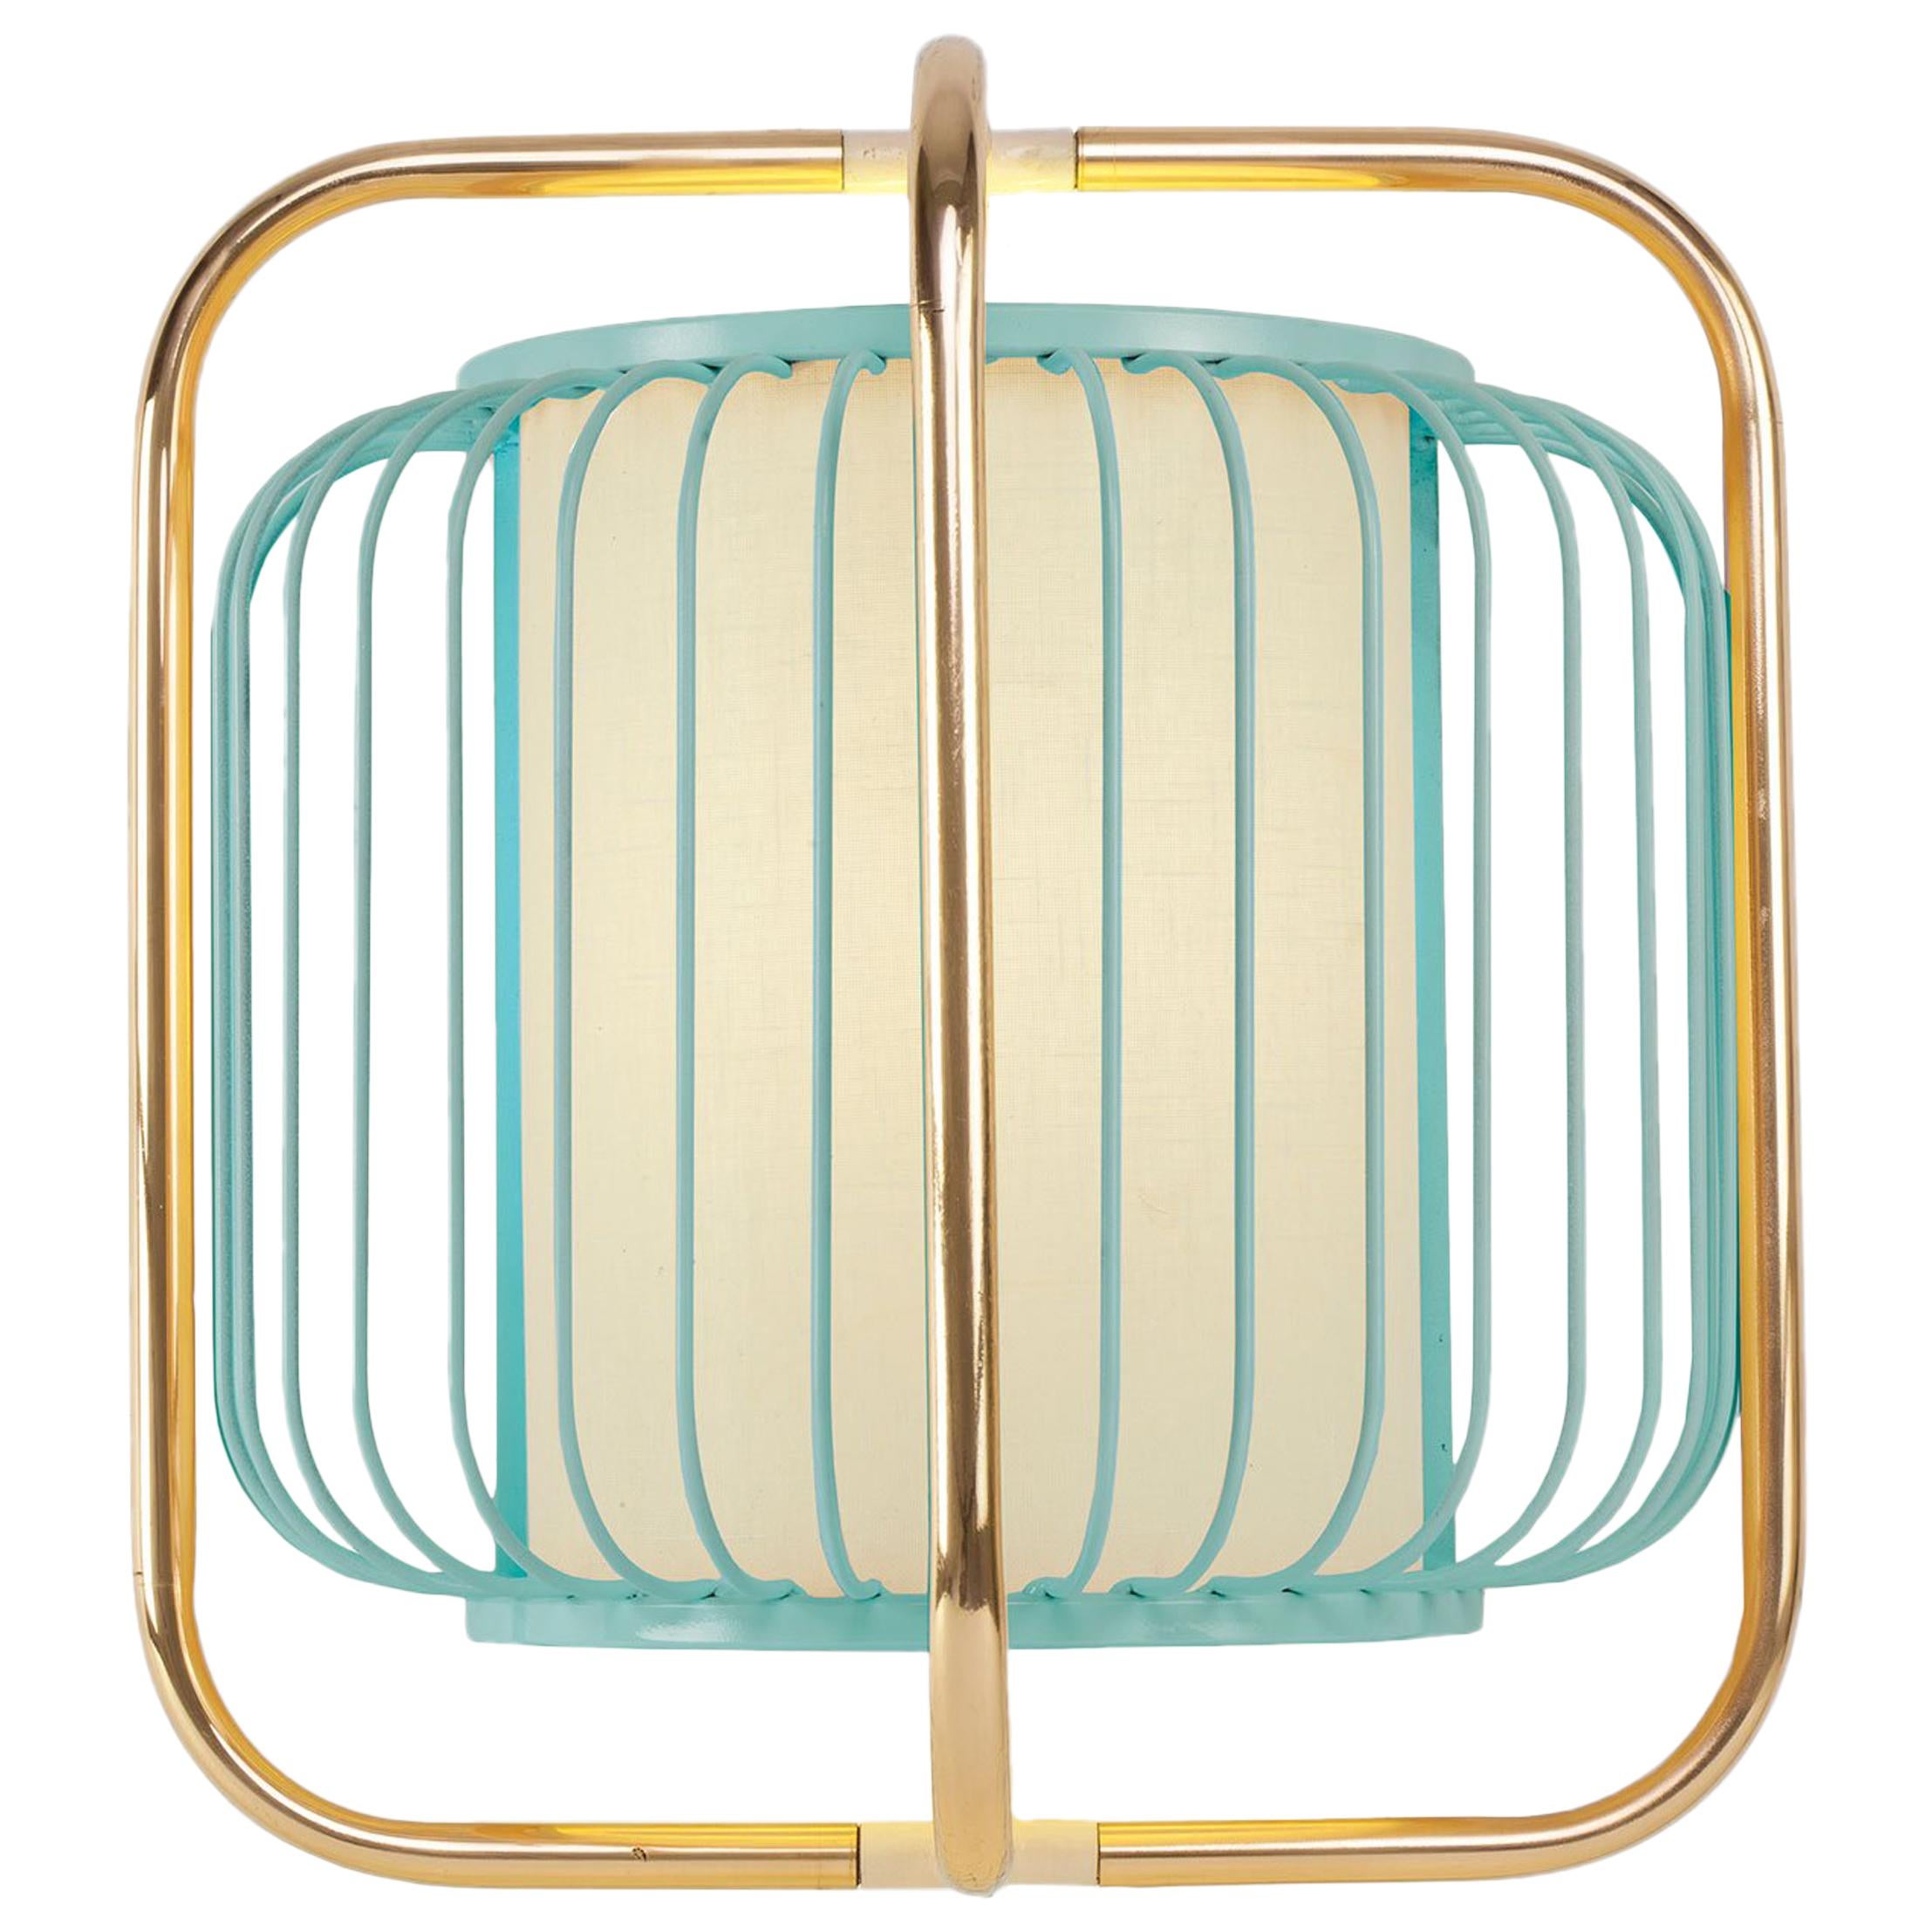 Contemporary Art Deco inspired Jules Wall Sconce in Jade Blue, Brass and Linen